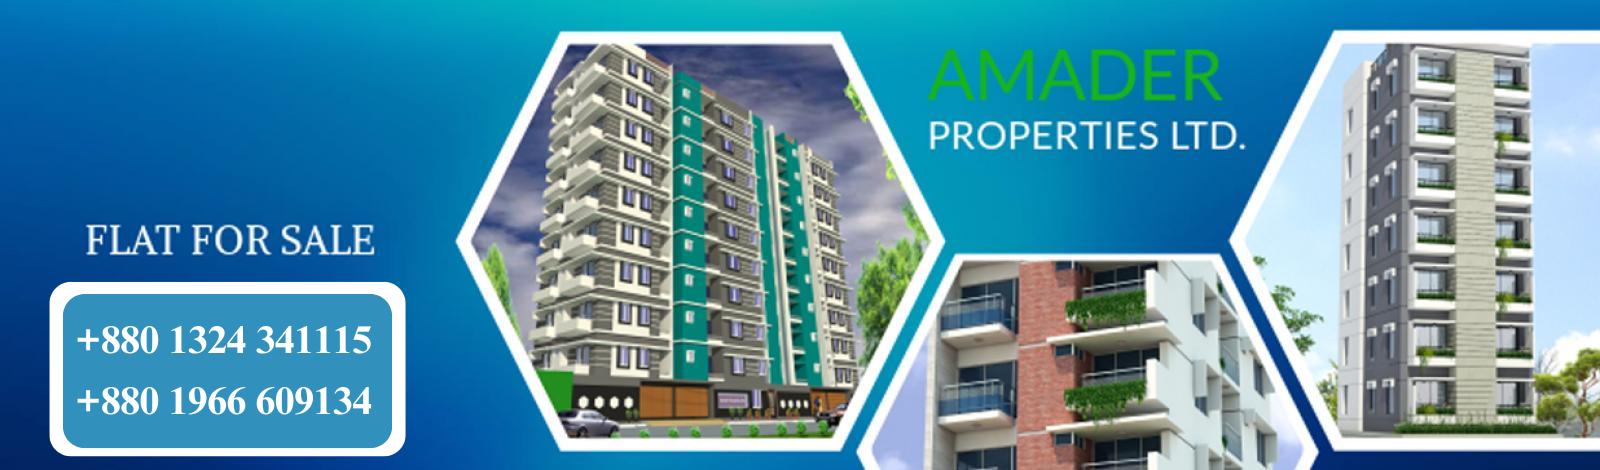 Amader Properties Limited banner